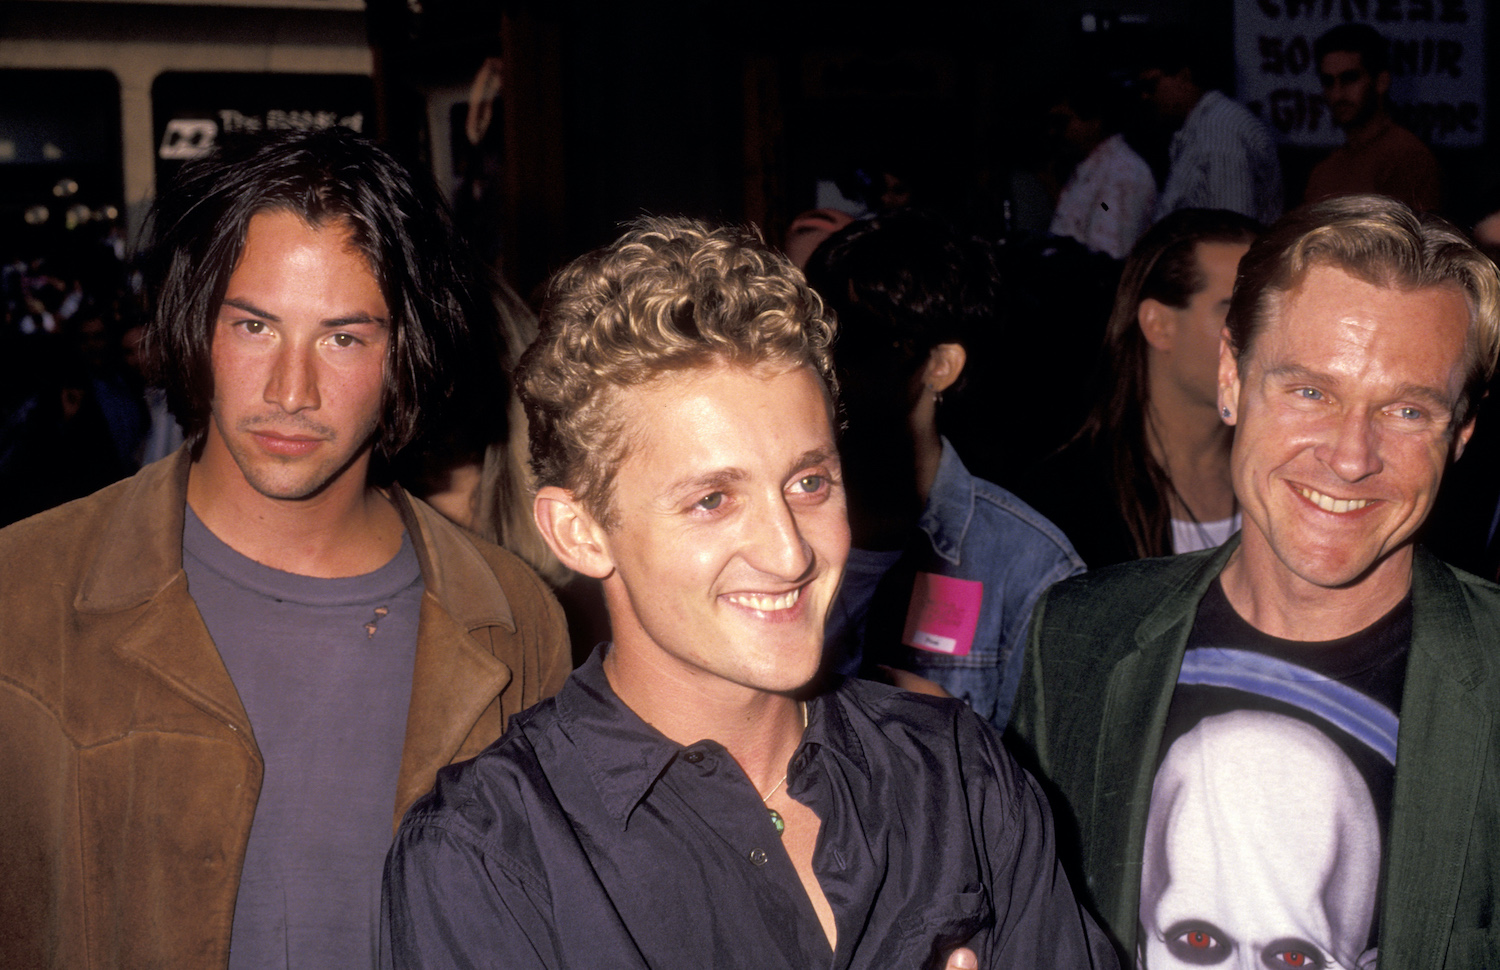 Keanu Reeves, Alex Winter, and William Sadler during Bill & Ted's Bogus Journey premiere